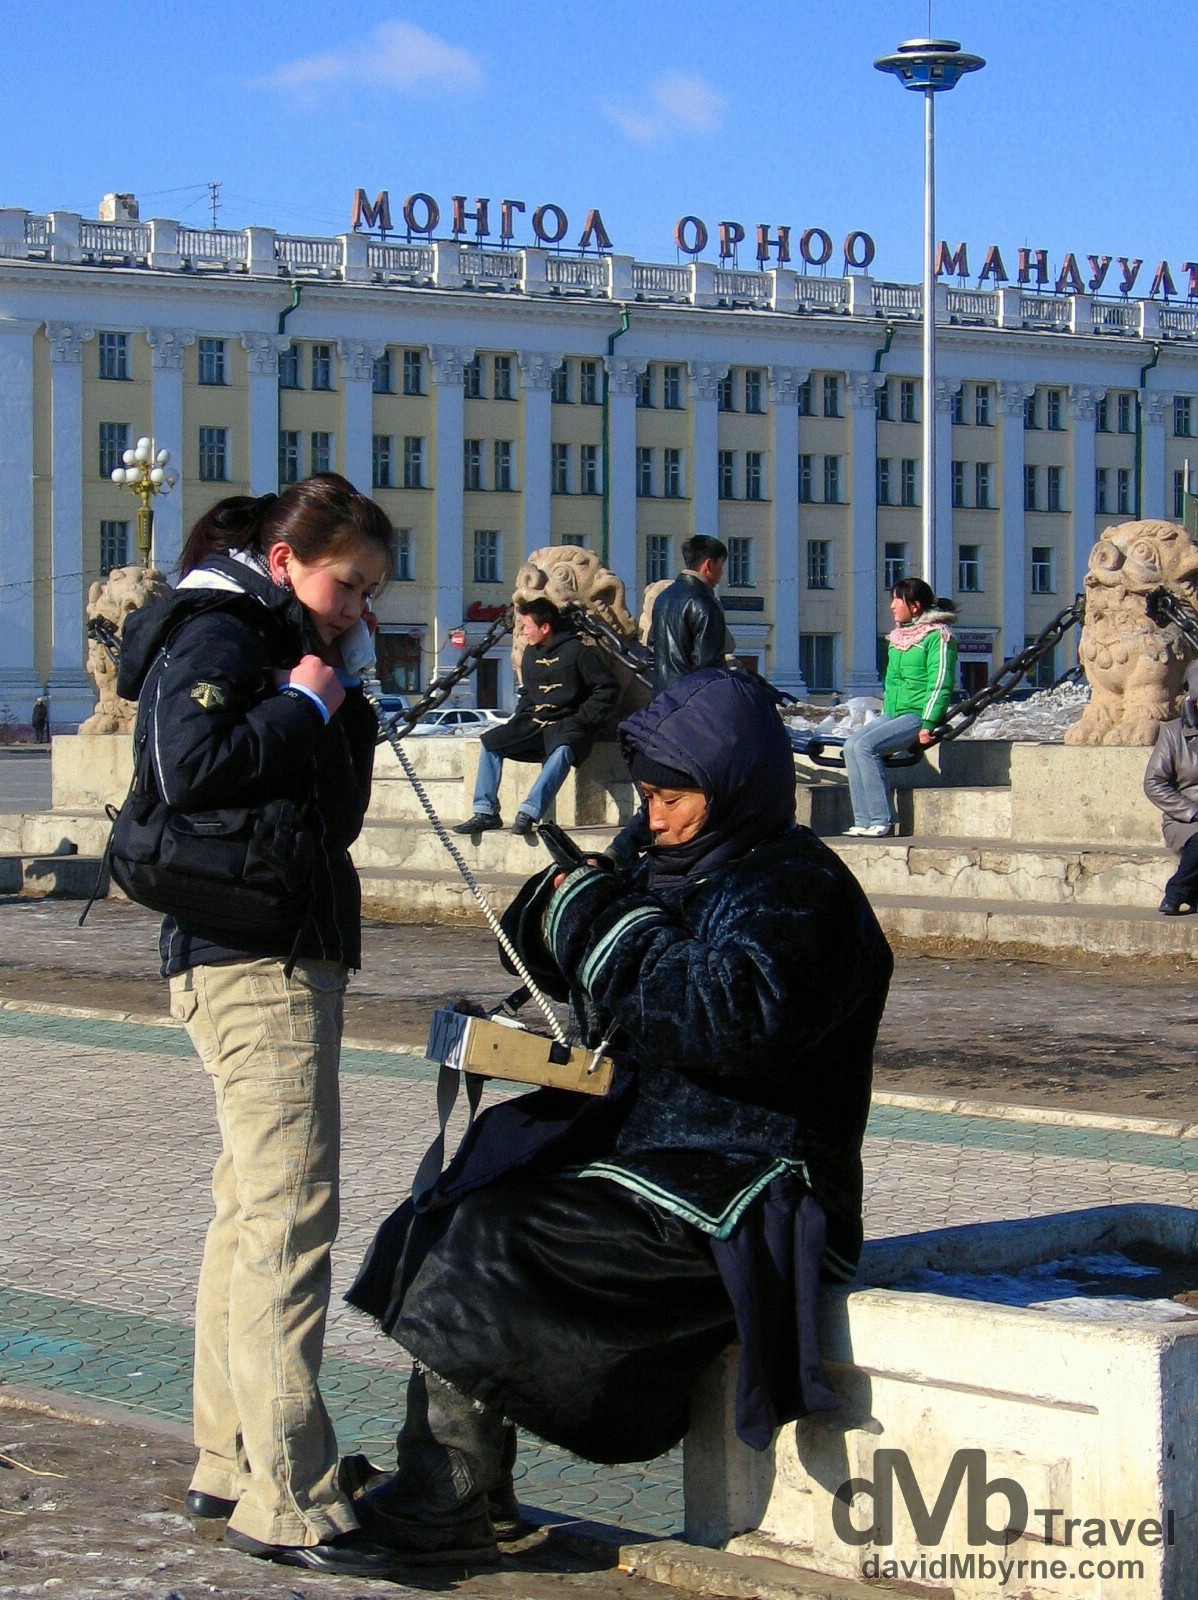 Connected in Sükhbaatar Square, Ulan Bator, Mongolia. February 16, 2006.